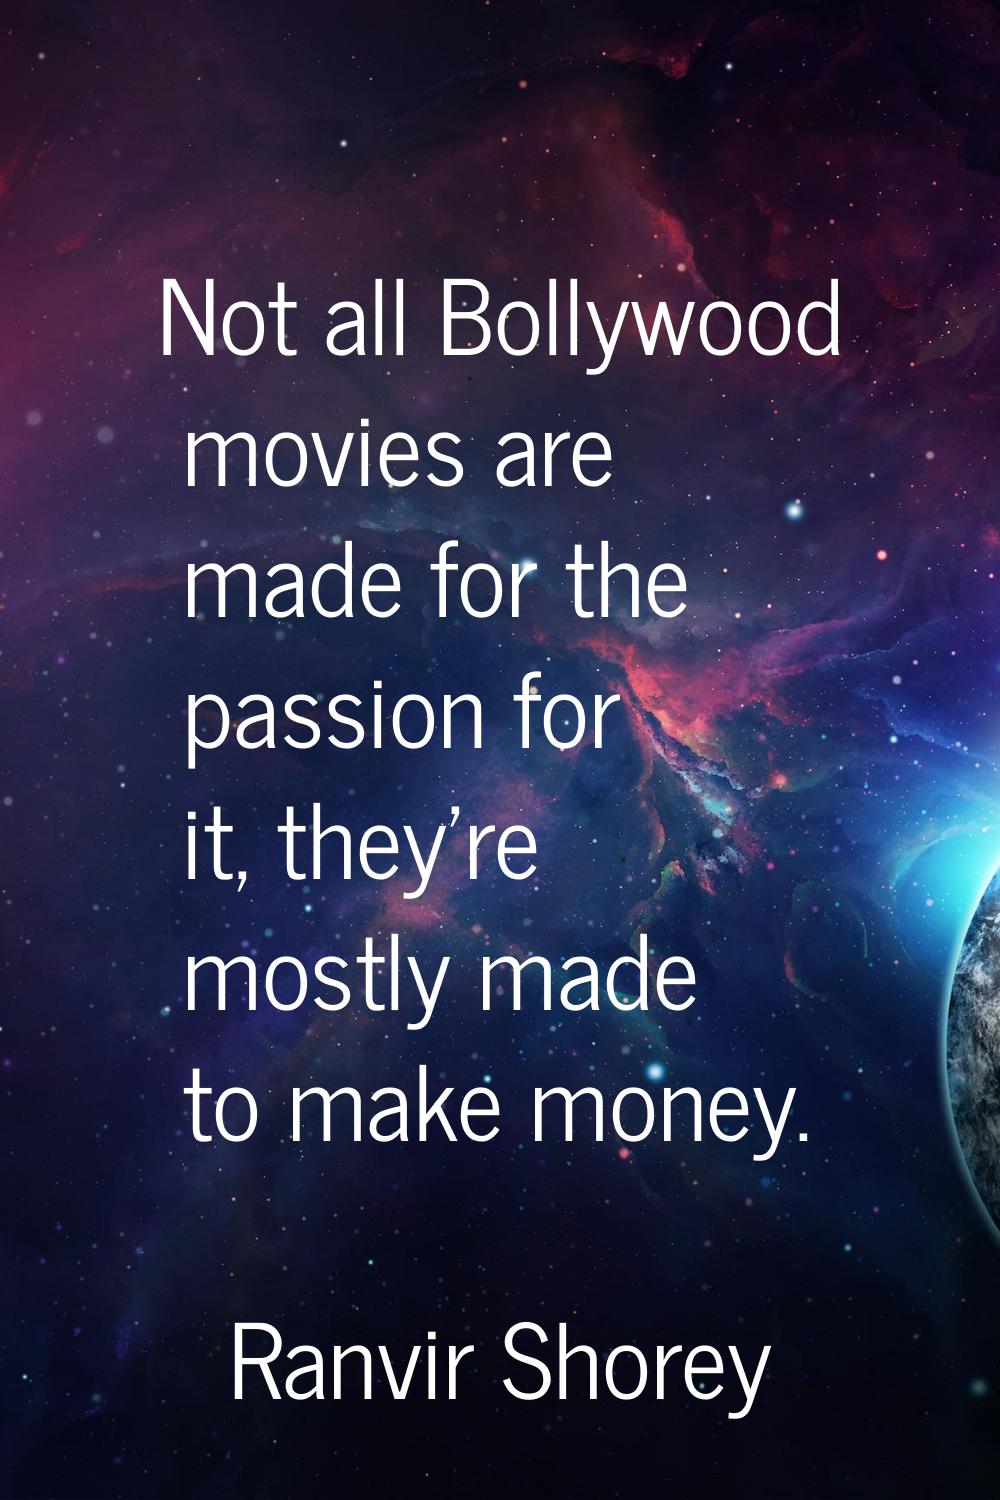 Not all Bollywood movies are made for the passion for it, they're mostly made to make money.